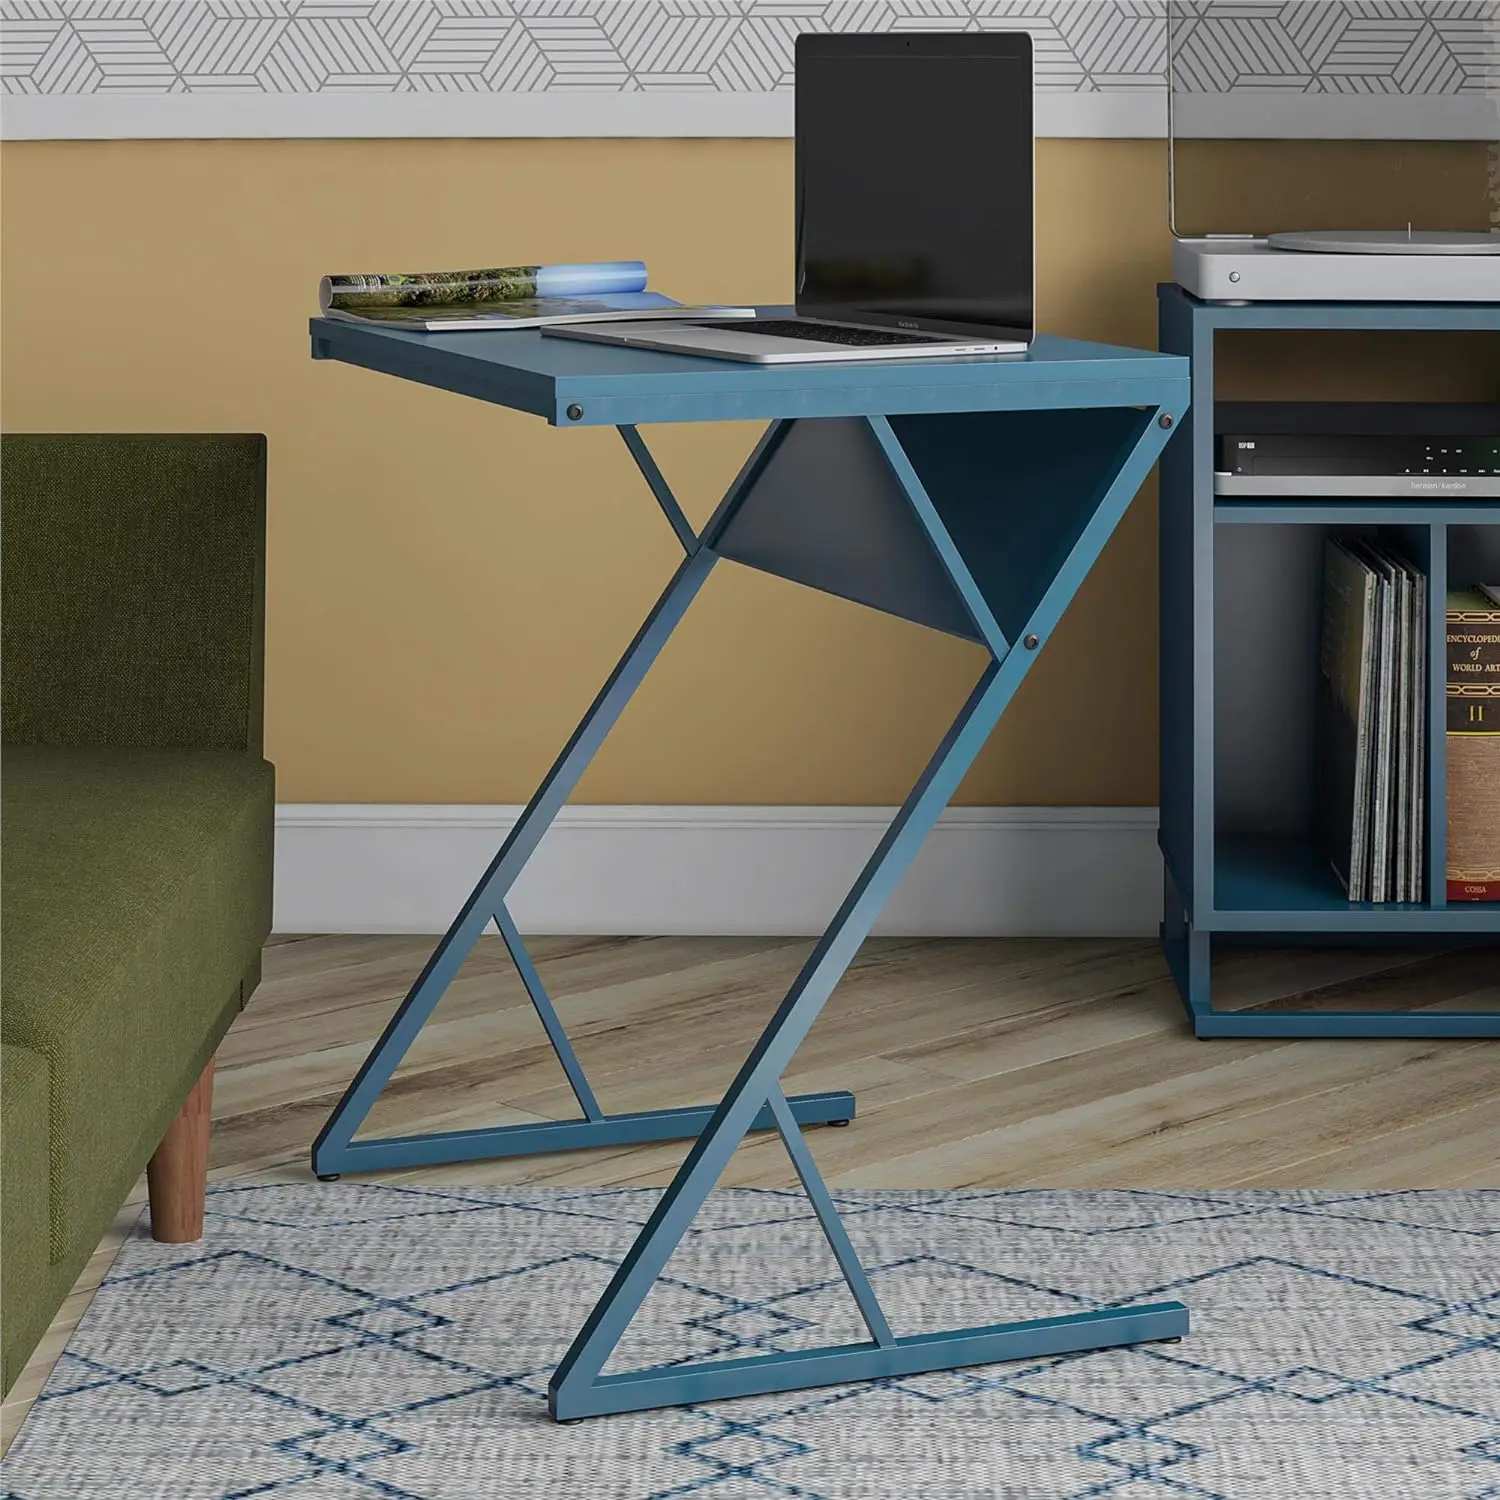 

Laptop Couch Desk & Accent Table, Blue Plywood chair Stool chair Chair for dining table Sillas para barra de cocina Metal chair